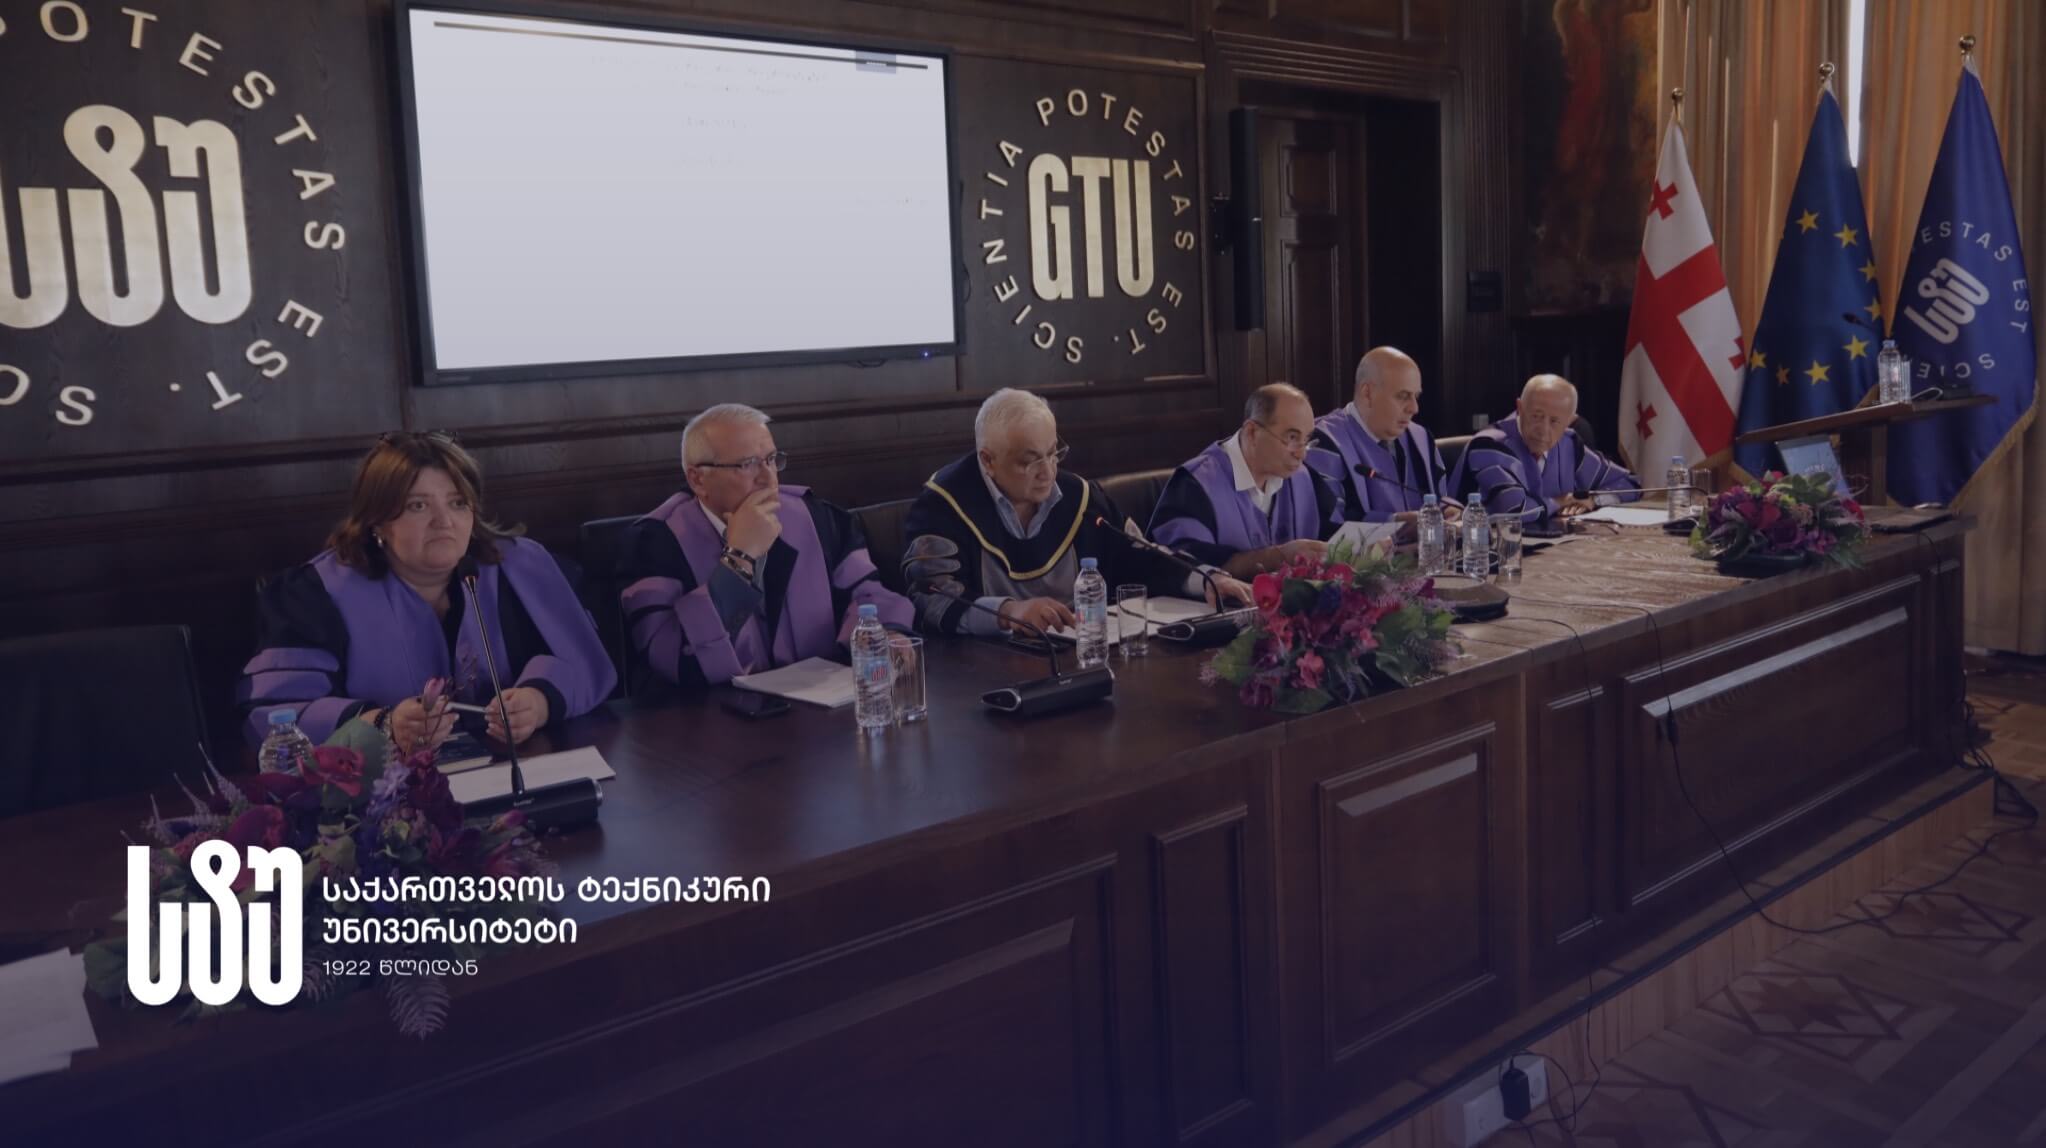 The chancellor of GTU presented to the Academic Council and the Senate the report of the work performed in 2023